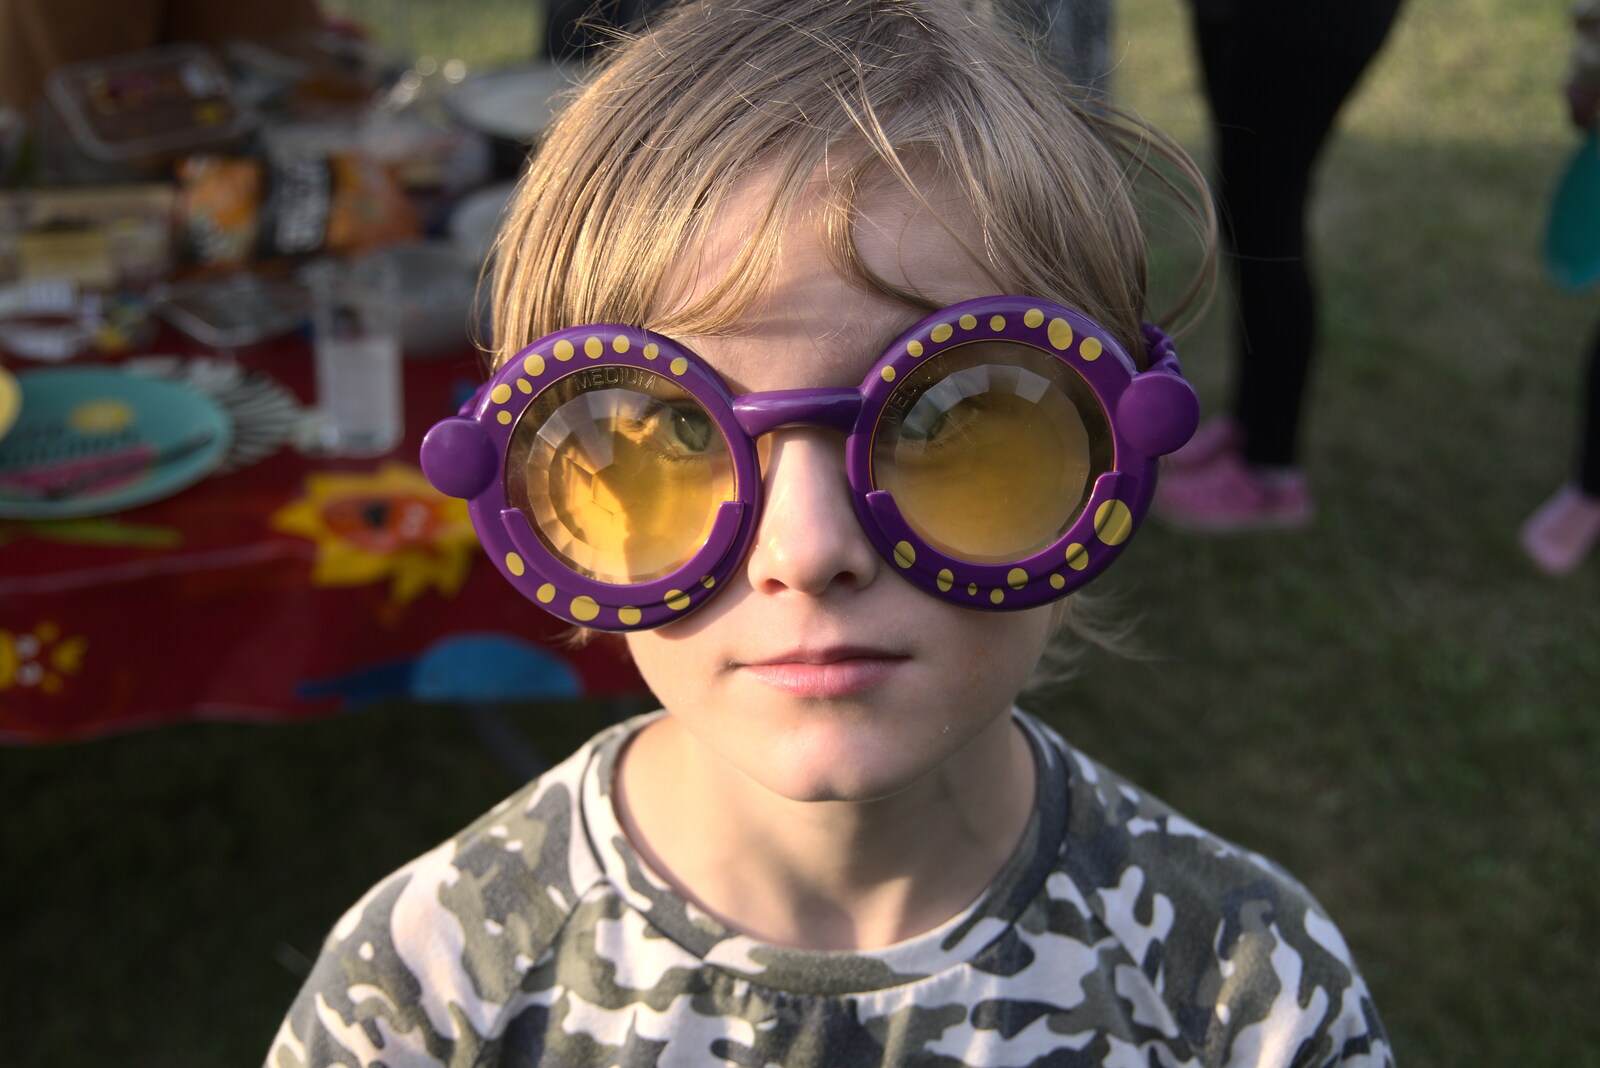 Harry has some Elton John shades on from Meg-fest, and Sean Visits, Bressingham and Brome, Suffolk - 1st August 2021